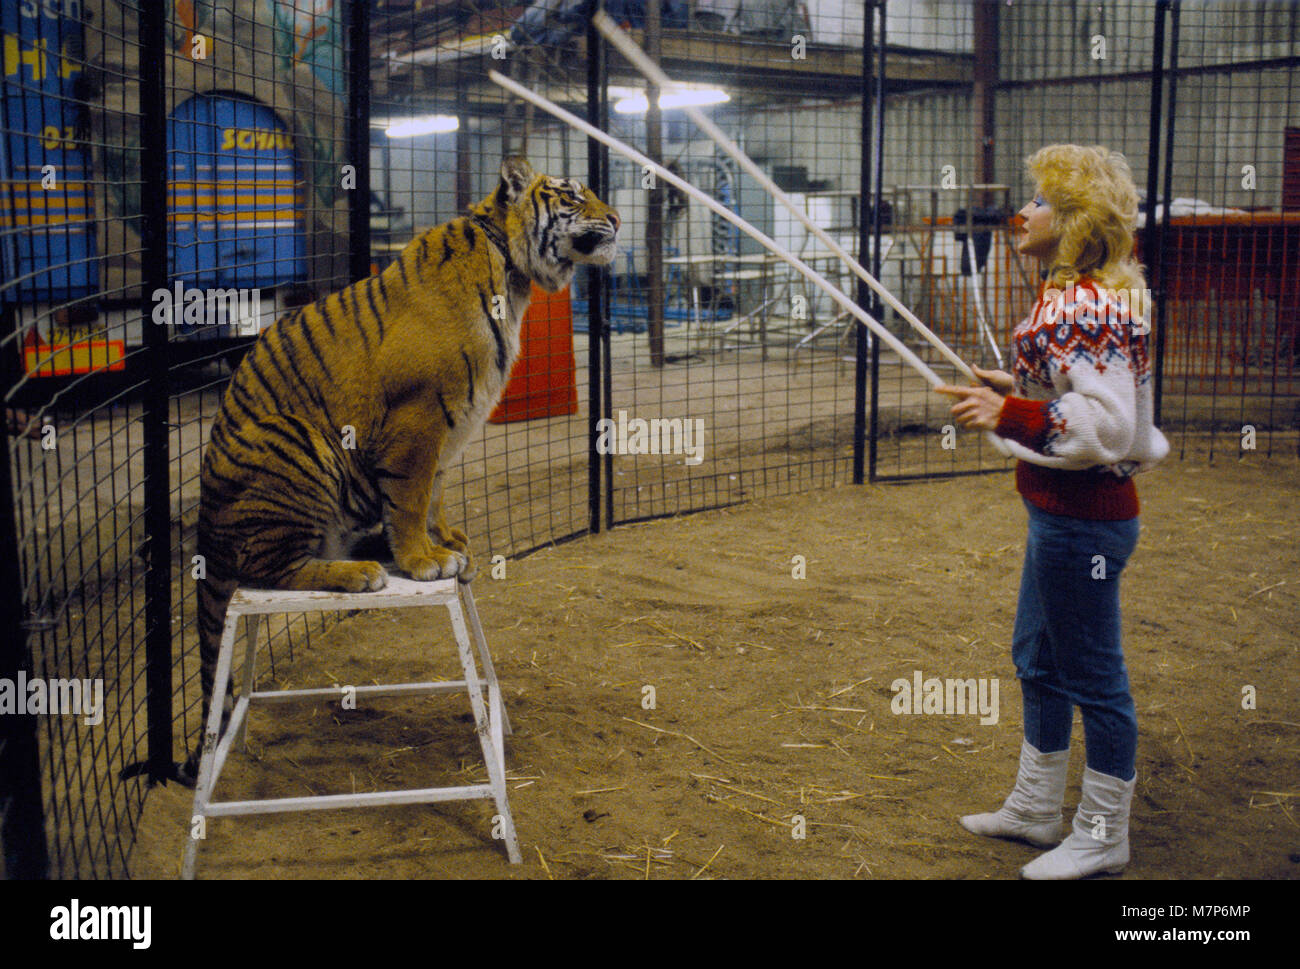 Caged wild animal in UK zoo. 1980s. Tiger training Gerry Cottles Circus. London England 80s HOMER SYKES Stock Photo